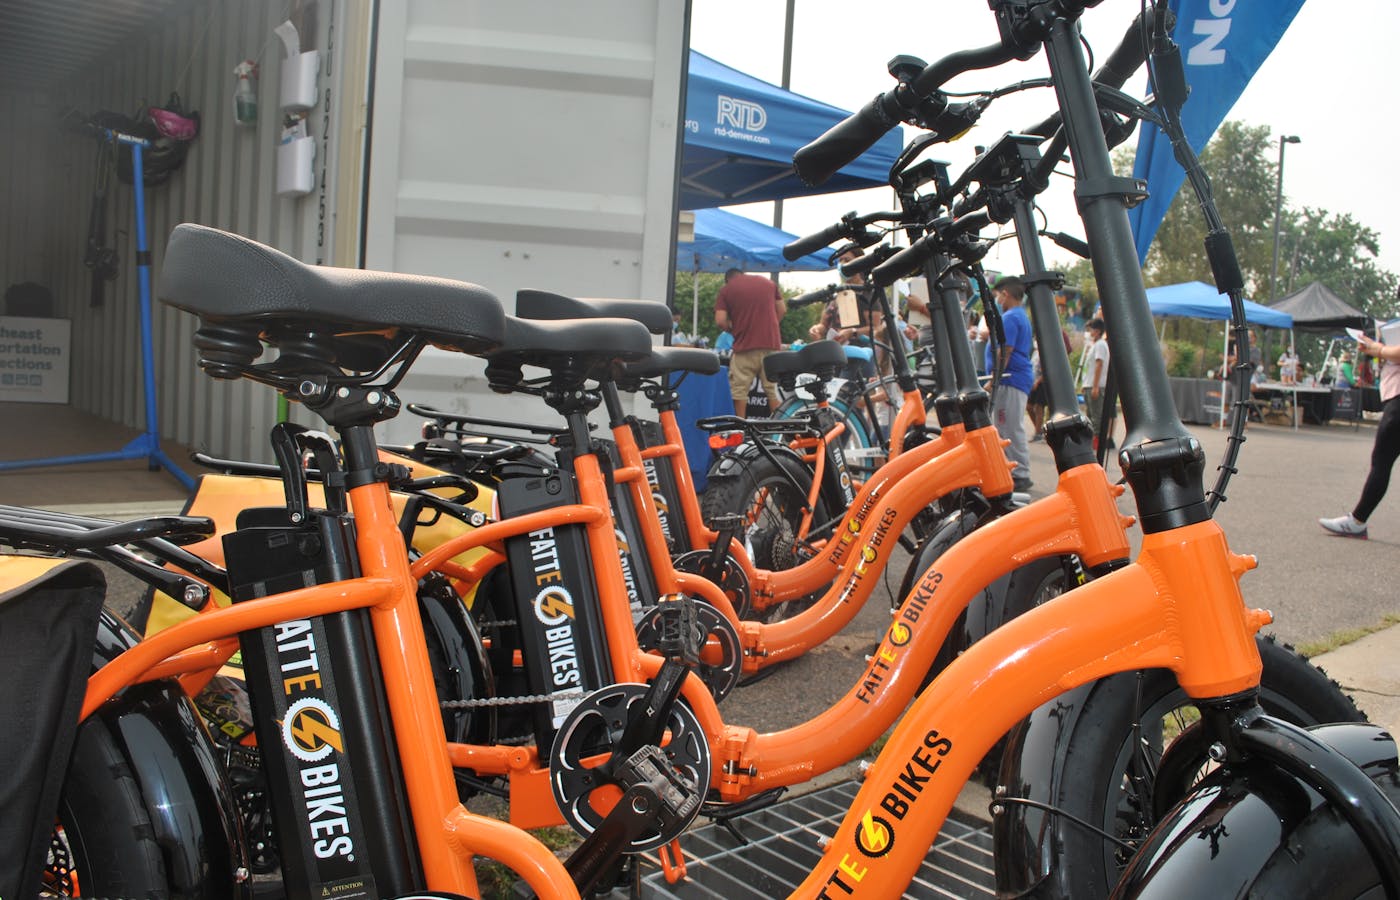 The electric bicycles at Denver, Colorado’s various bike libraries come from FattE-Bikes, a locally owned and operated shop.